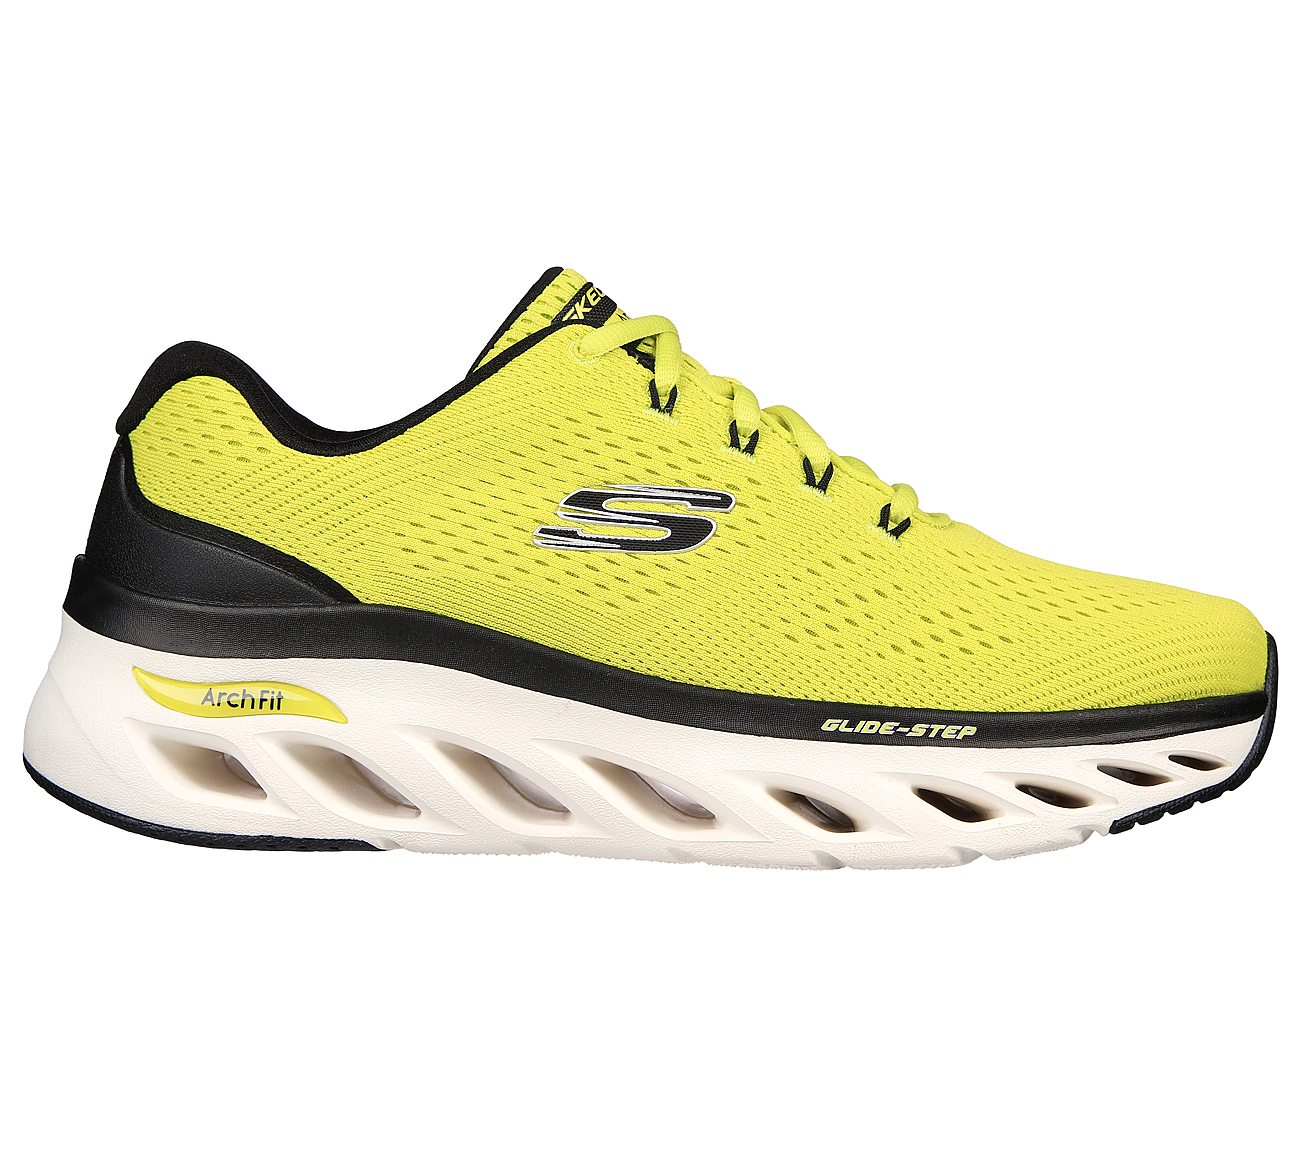 ARCH FIT GLIDE-STEP, LIME/BLACK Footwear Lateral View